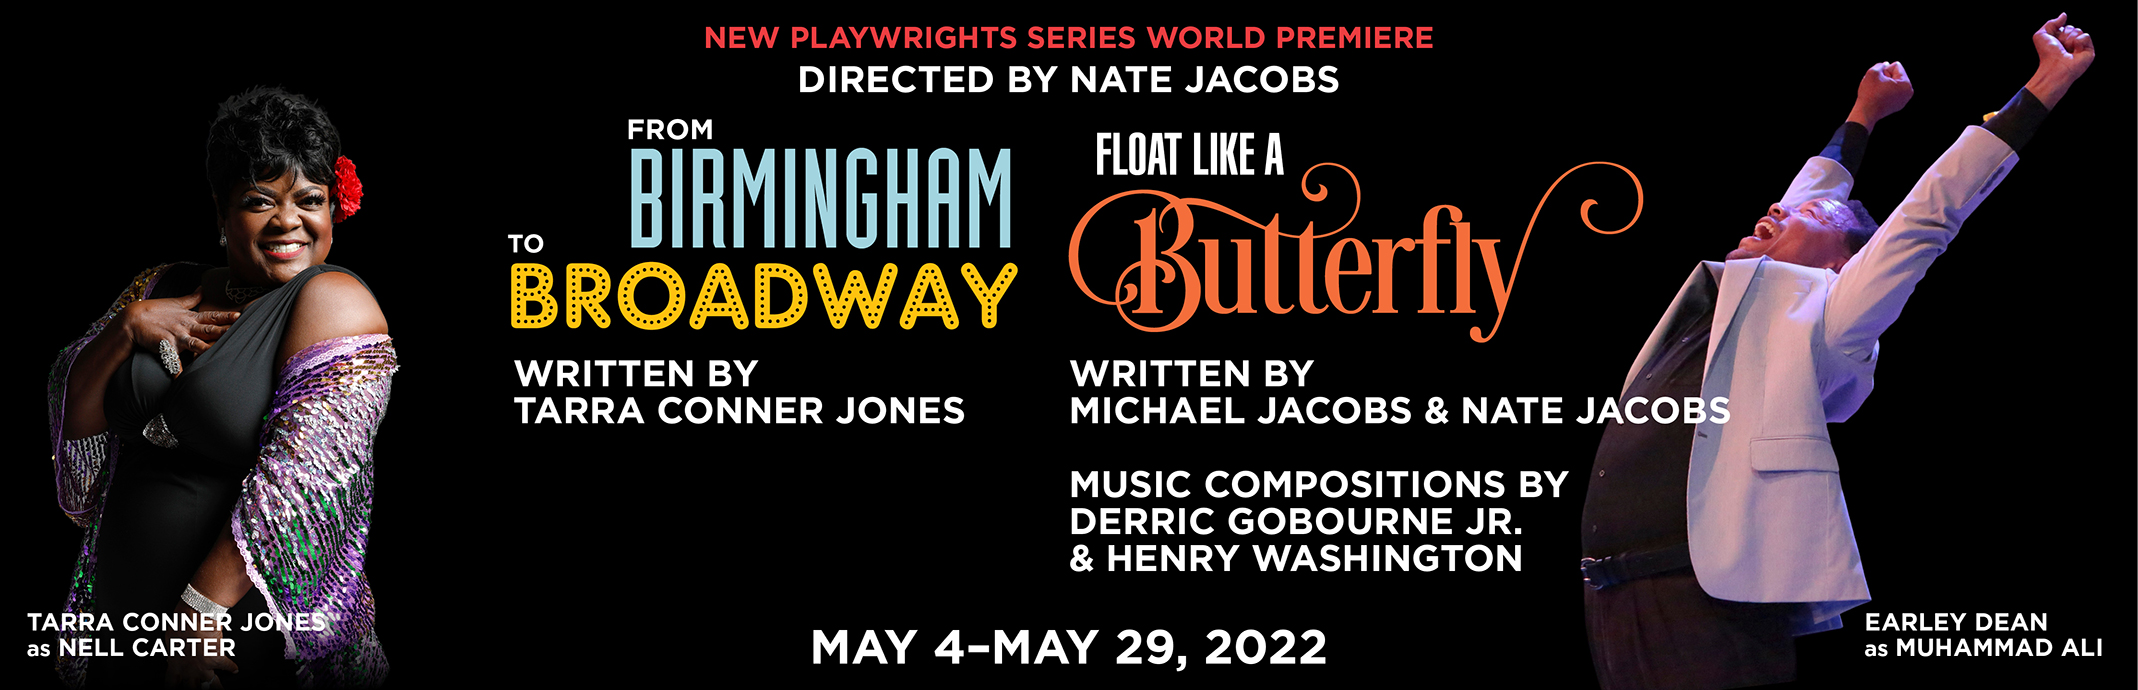 New Playwright Series World Premiere: Directed By Nate Jacobs; May 4-29, 2022